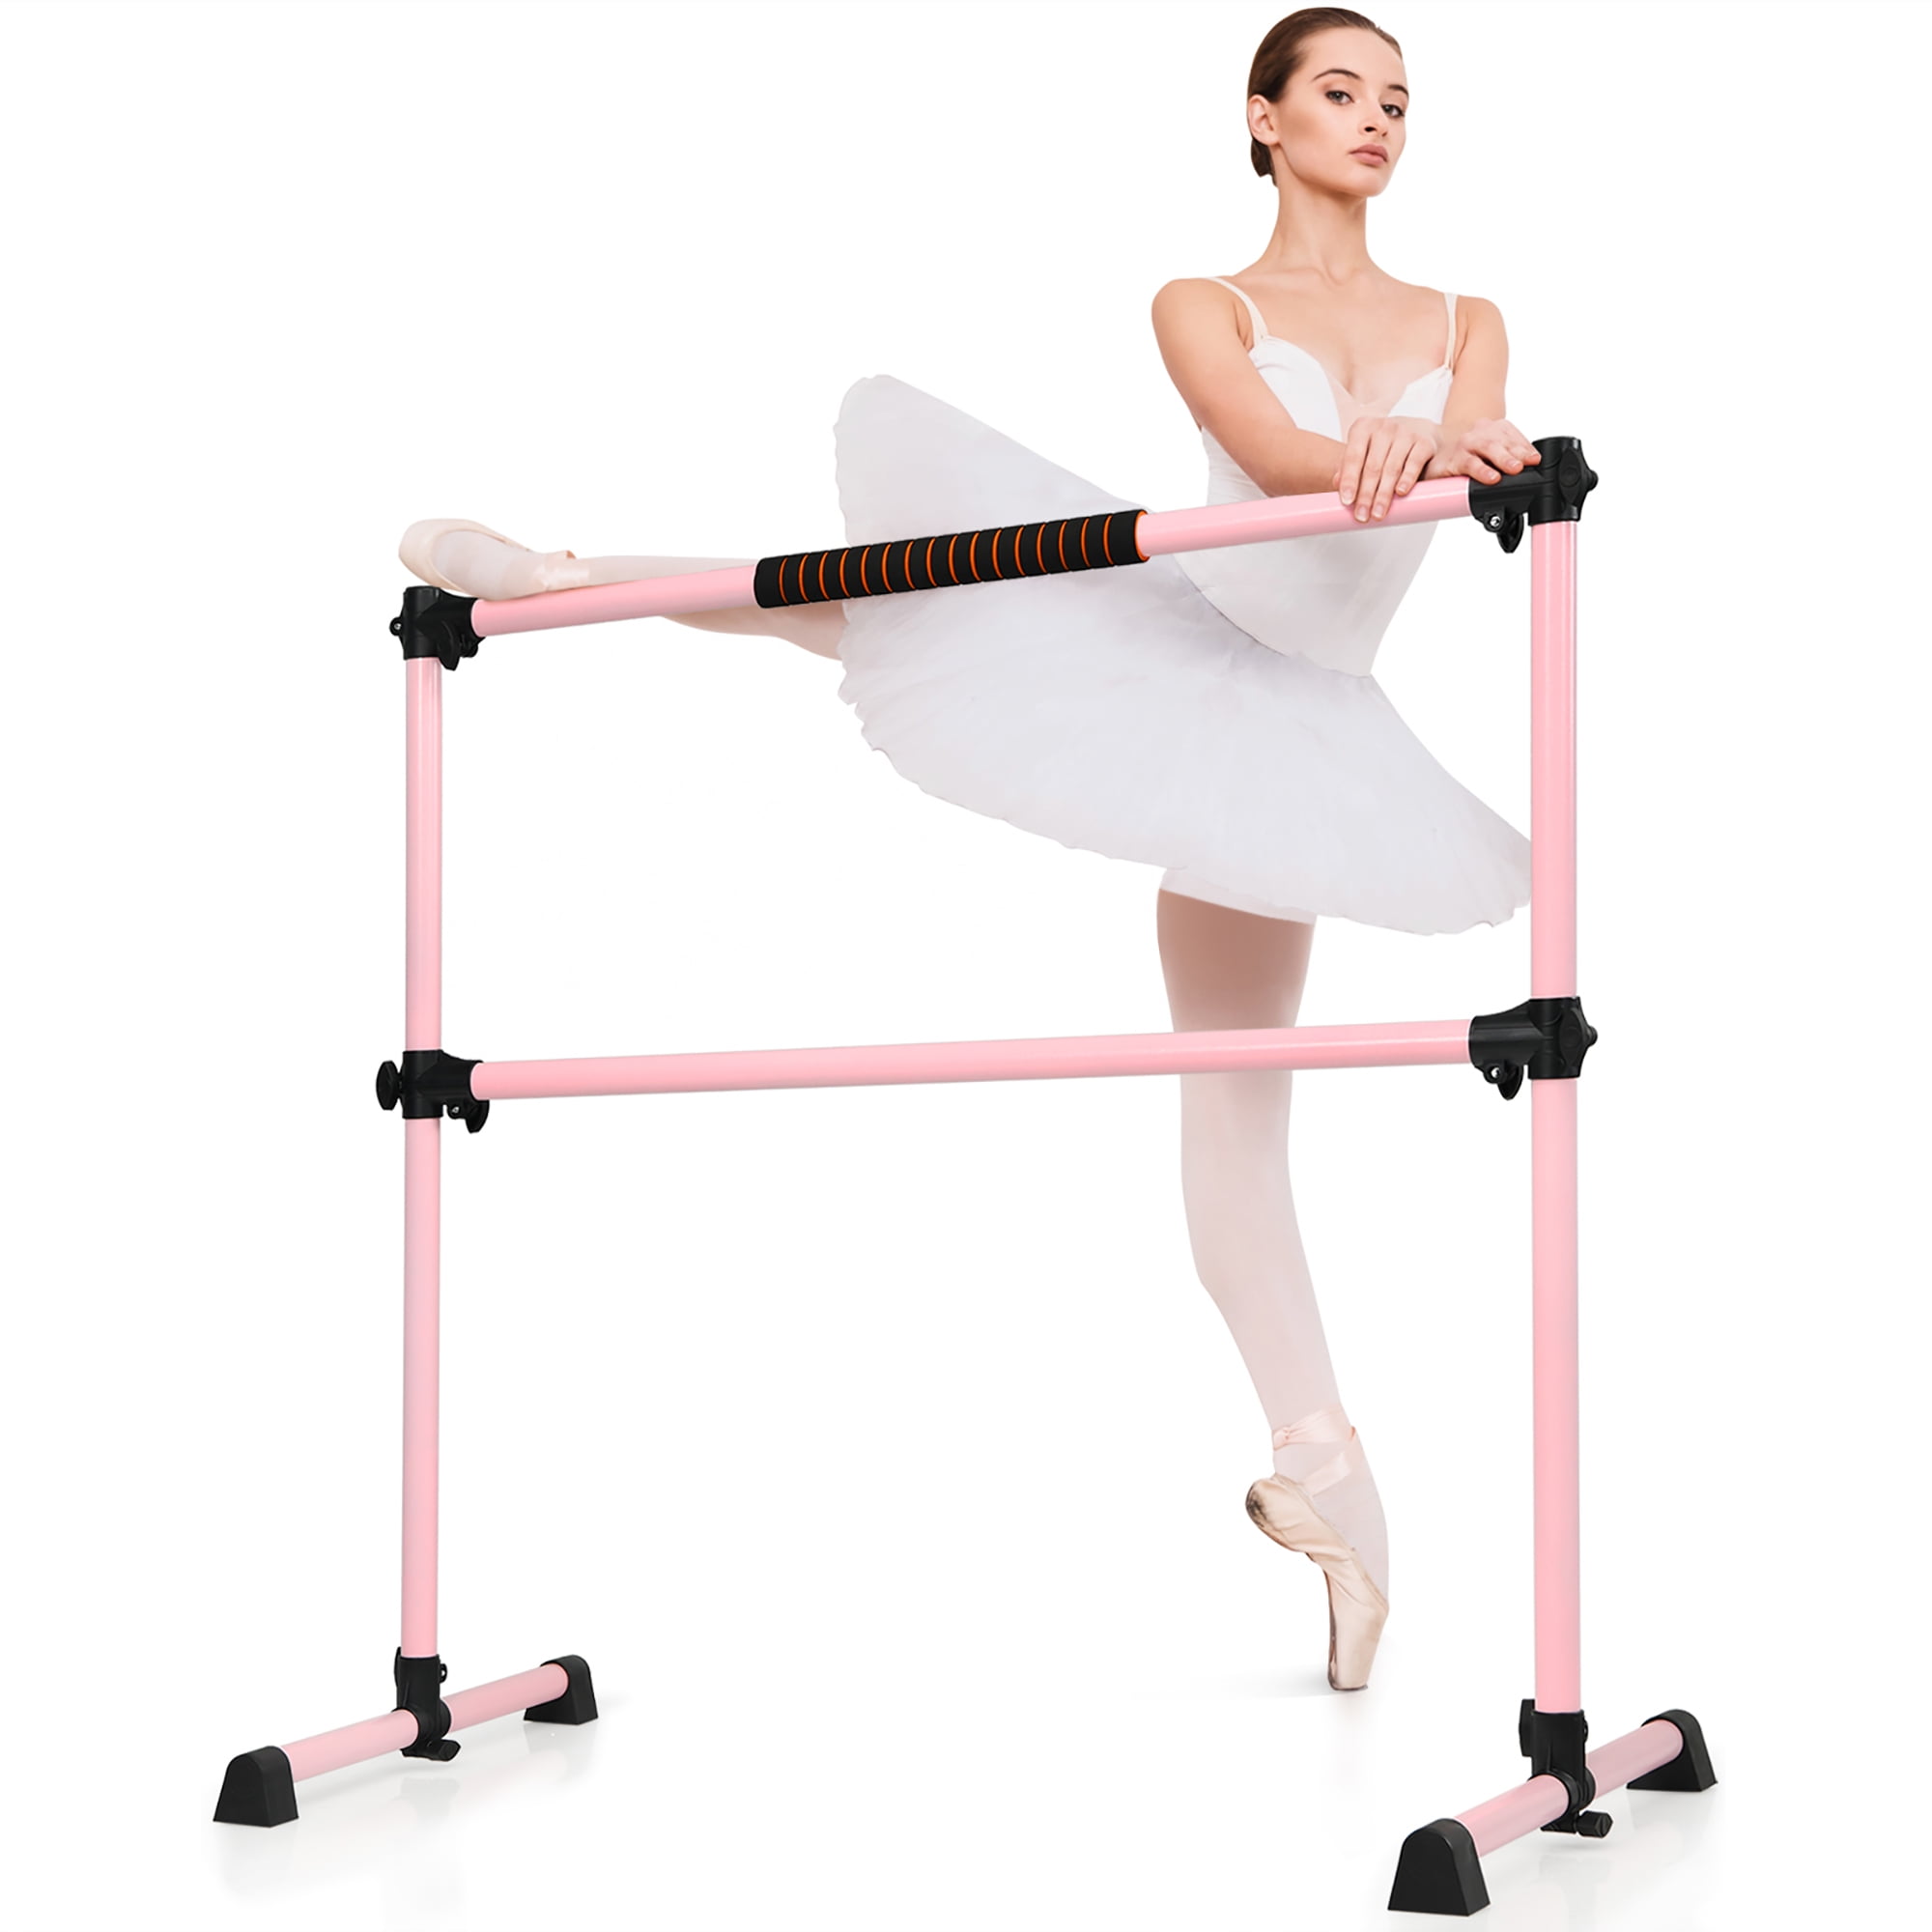 Details about   LexiBarre STANDARD-COLOR w/STAR STABILITY Portable Travel Ballet Barre 42"x24" 